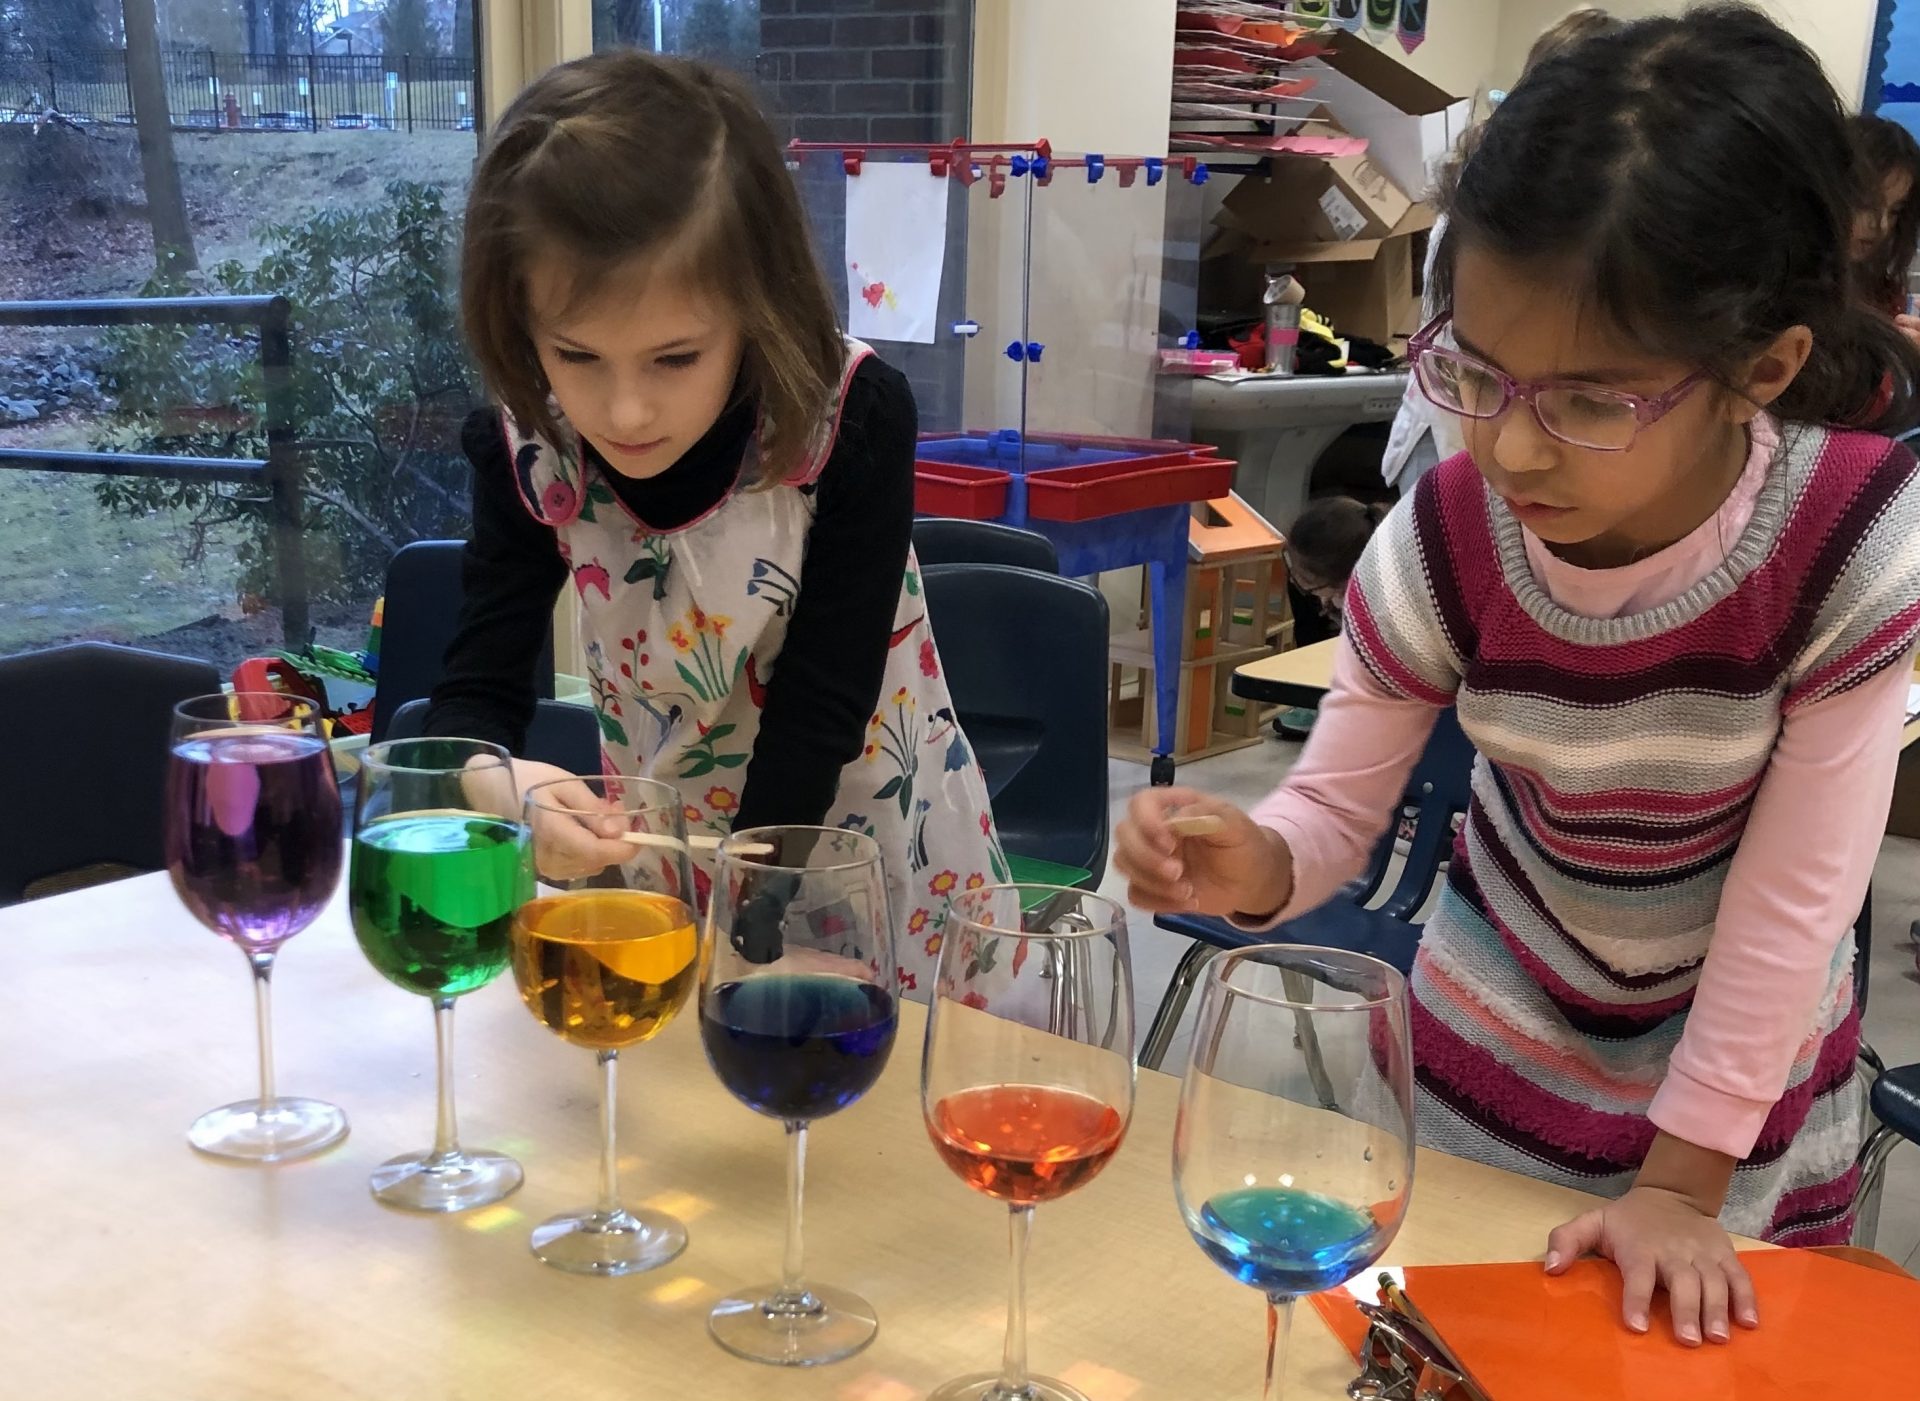 Two first grade girls work on a science project with colored water in class.